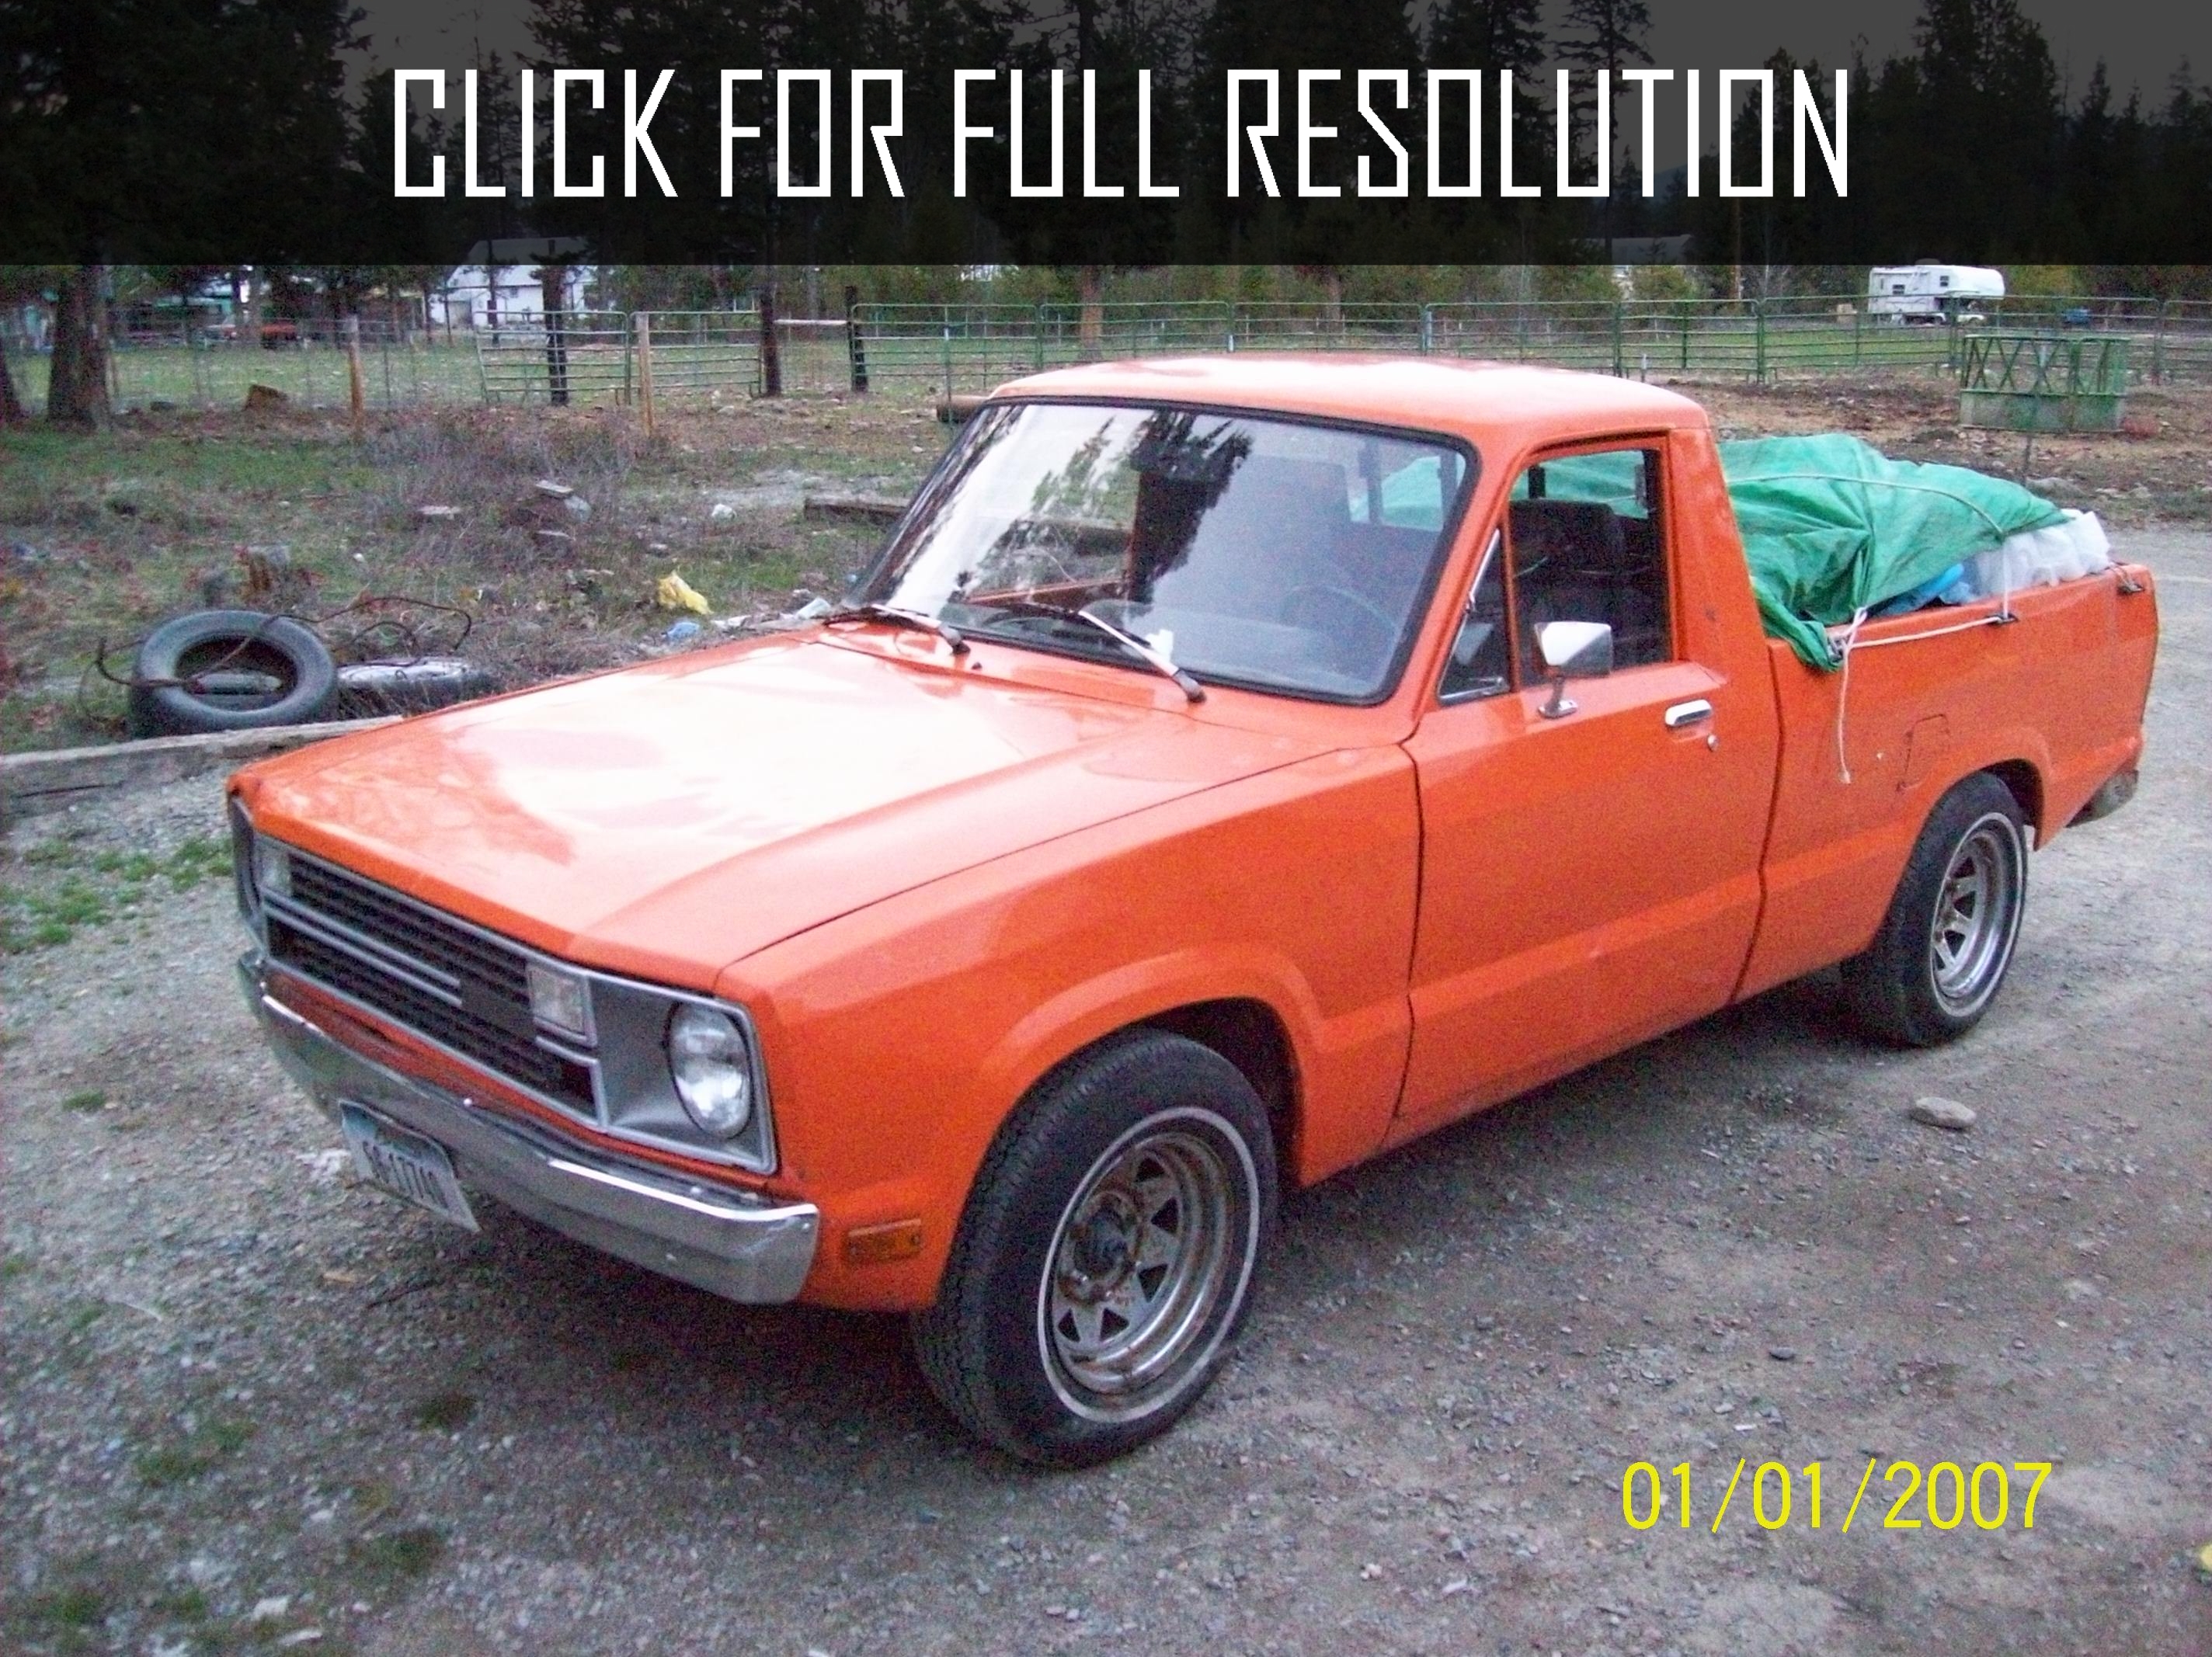 1981 Ford Courier